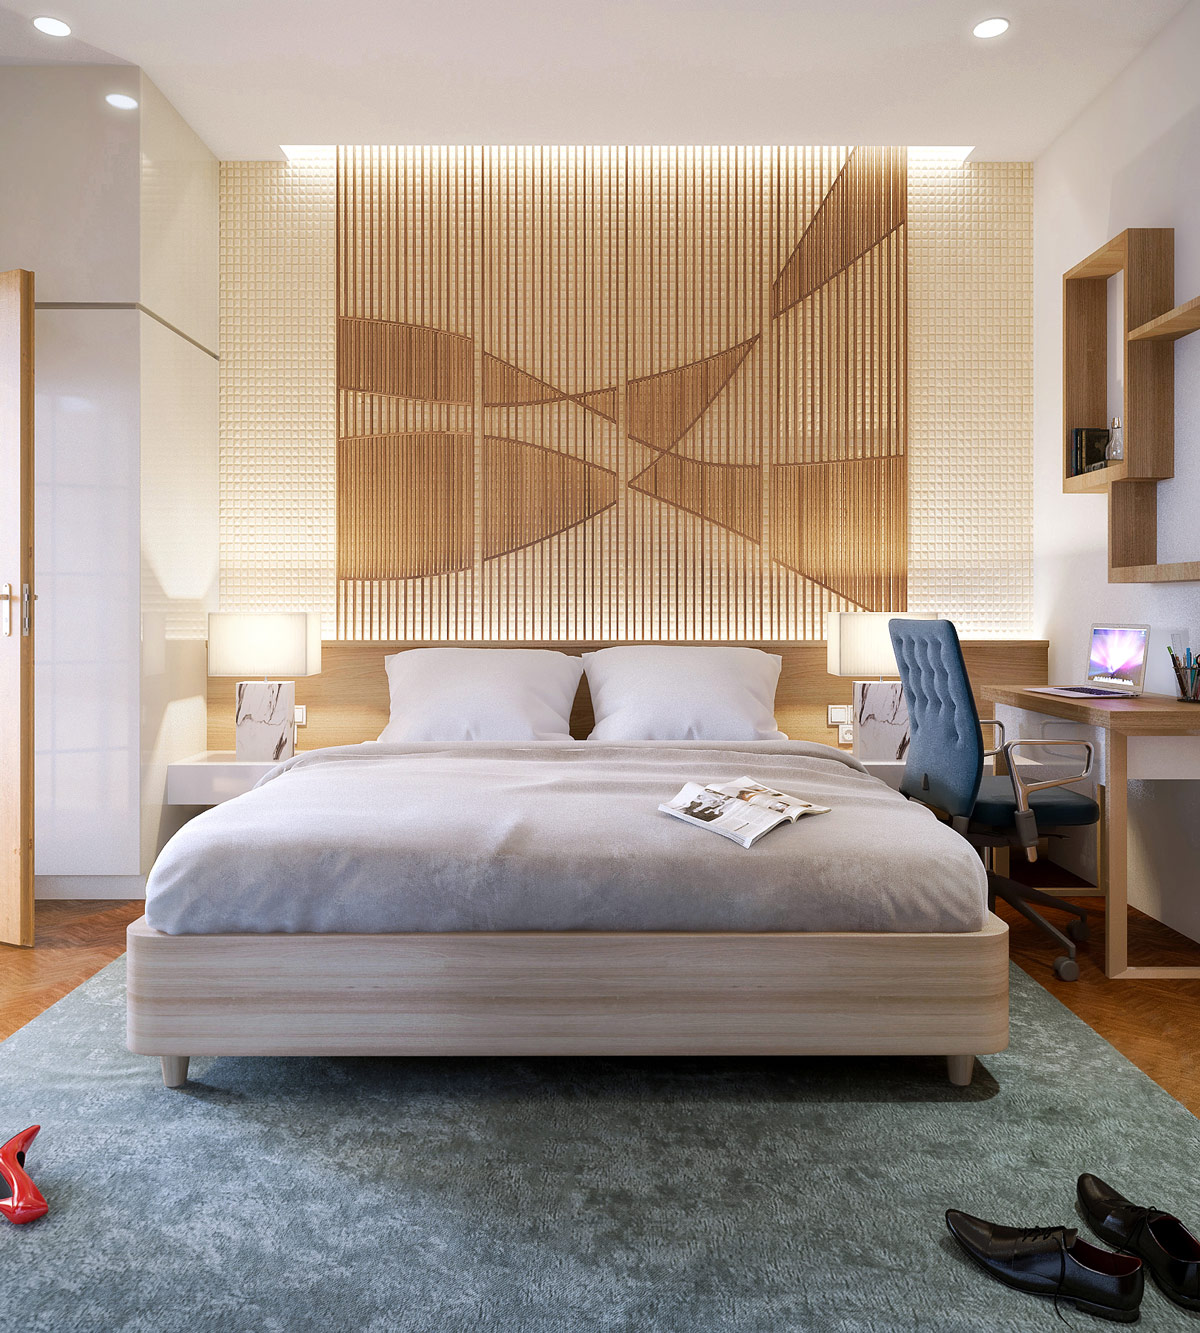 Bedroom Accent Wall Slats Intertwined Pattern "Width =" 1200 "Height =" 1333 "srcset =" https://mileray.com/wp-content/uploads/2017/04/bedroom-accent-wall-slats -intertwined-pattern-Studio-34.jpg 1200w, https://mileray.com/wp-content/uploads/2017/04/bedroom-accent-wall-slats-intertwined-pattern-Studio-34-270x300.jpg 270w , https://mileray.com/wp-content/uploads/2017/04/bedroom-accent-wall-slats-intertwined-pattern-Studio-34-768x853.jpg 768w, https://mileray.com/wp- content / uploads / 2017/04 / bedroom-accent-wall-slats-intertwined-pattern-studio-34-922x1024.jpg 922w, https://mileray.com/wp-content/uploads/2017/04/bedroom-accent -wall-slats-intertwined-pattern-Studio-34-696x773.jpg 696w, https://mileray.com/wp-content/uploads/2017/04/bedroom-accent-wall-slats-intertwined-pattern-Studio- 34-1068x1186.jpg 1068w, https://mileray.com/wp-content/uploads/2017/04/bedroom-accent-wall-slats-intertwined-pattern-Studio-34-378x420.jpg 378w "sizes =" ( maximum porridge te: 1200px) 100vw, 1200px